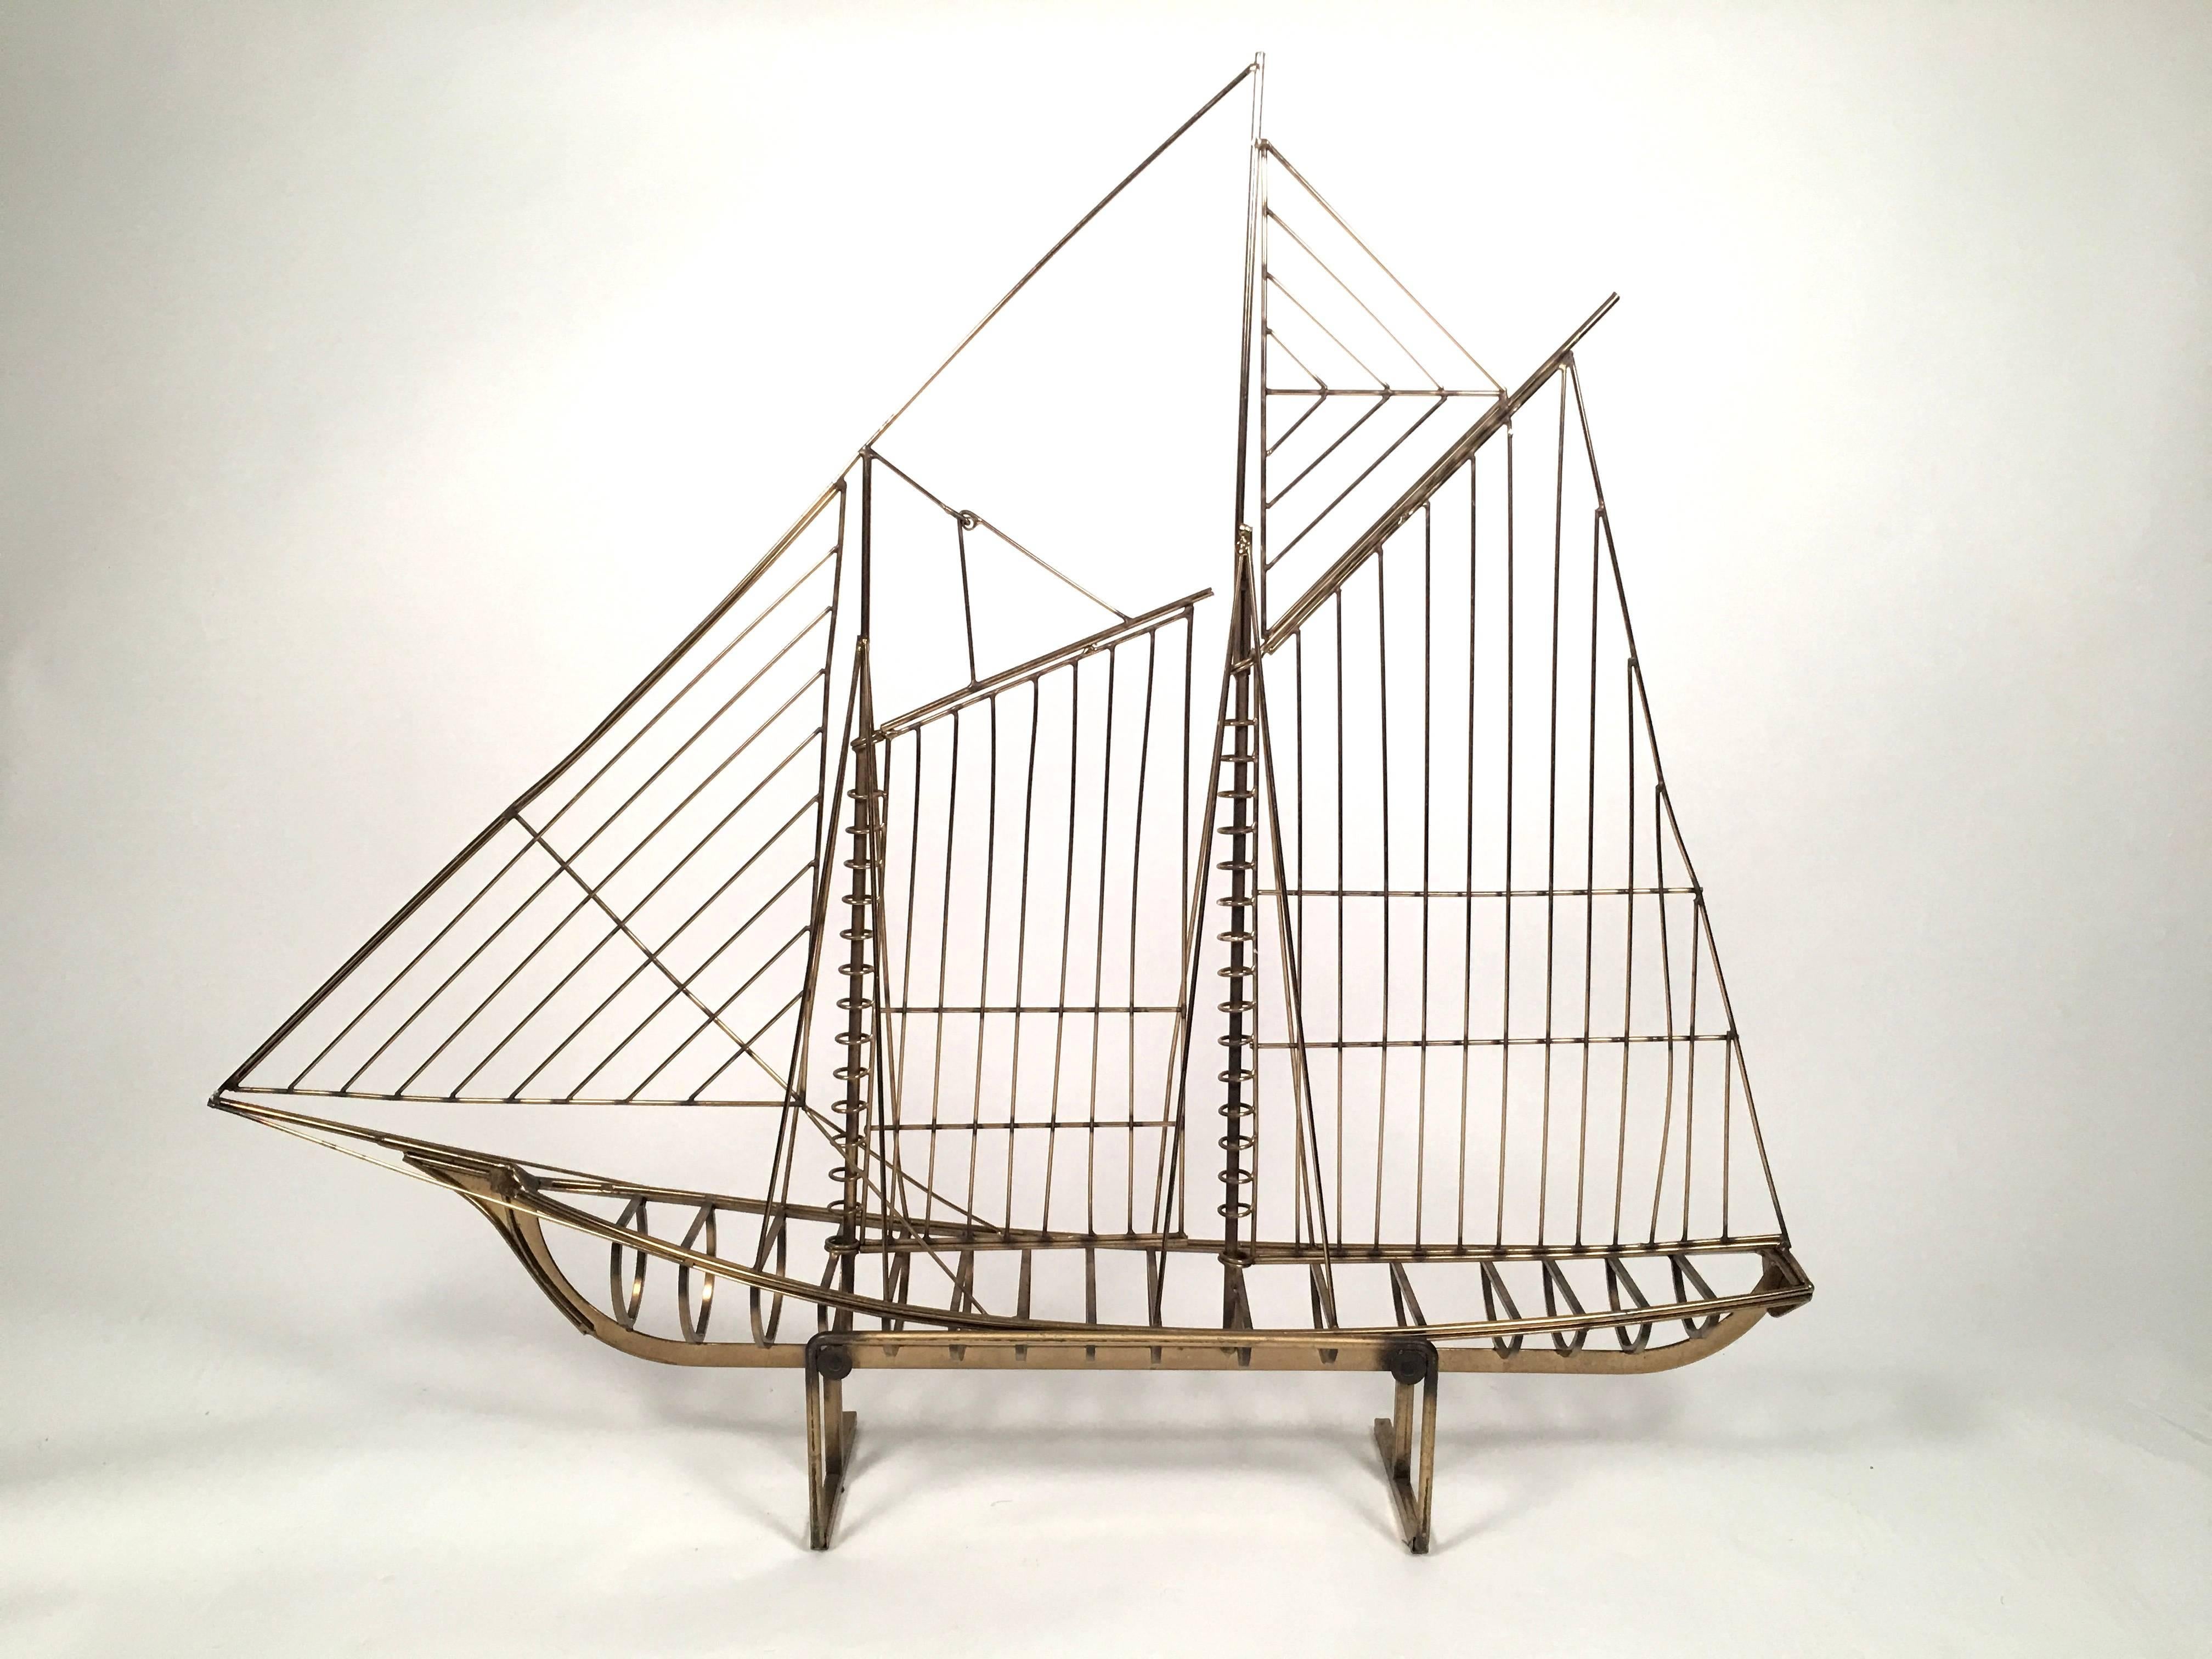 A large, original Curtis Jere brass ship sculpture in brass, the two masted schooner at full sail, beautifully modern and simple, yet well detailed, with integrated stand so that it may be displayed easily on a table or mantel. Signed C. Jeré and